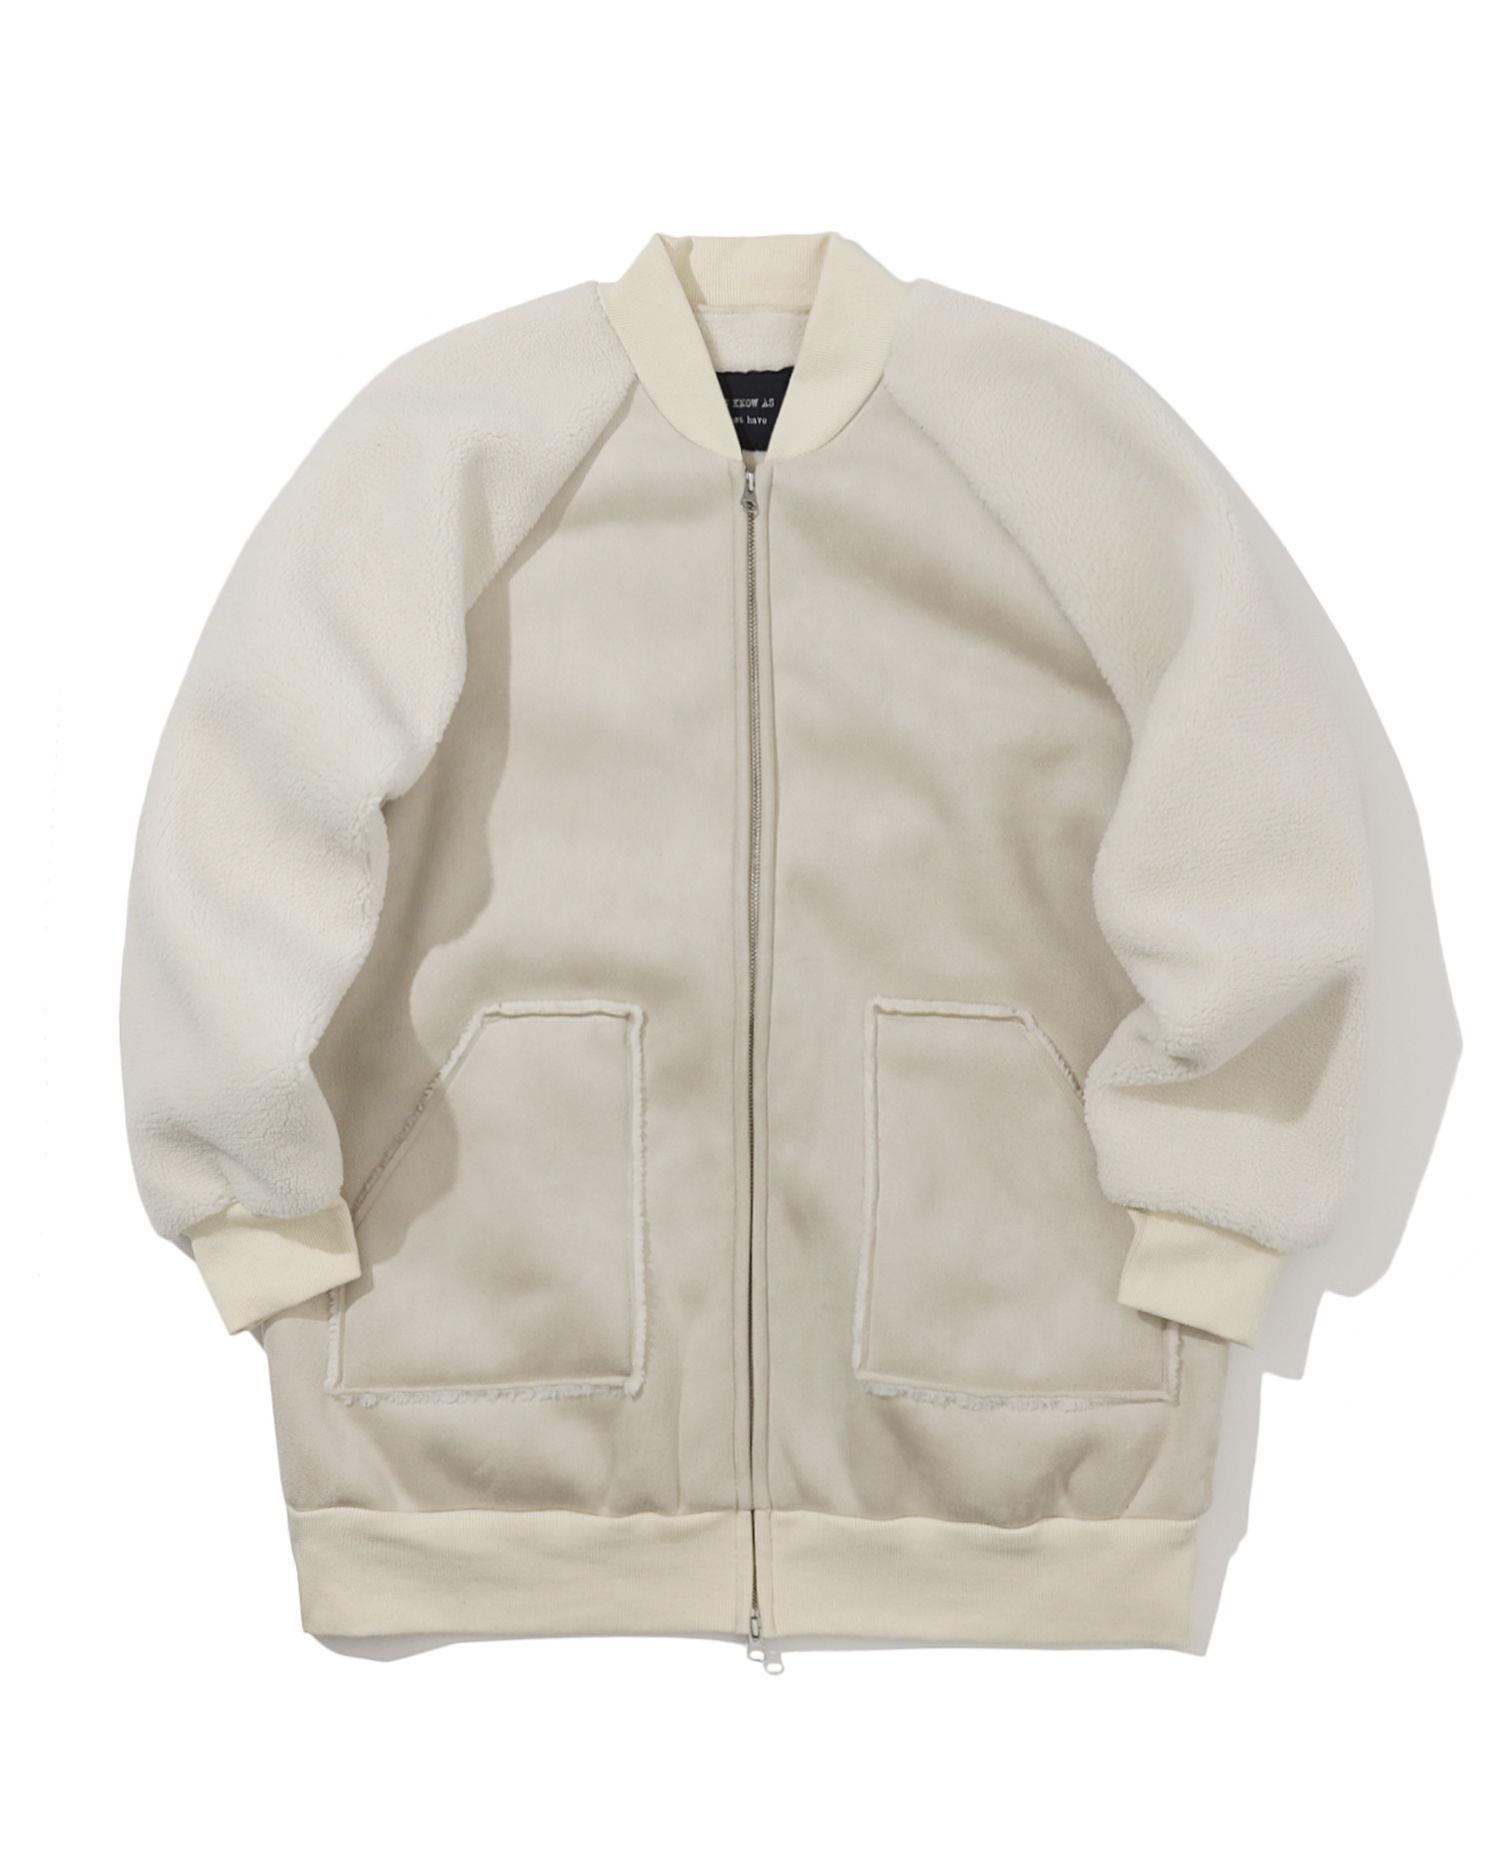 Fleece sleeve bomber jacket by AS KNOW AS